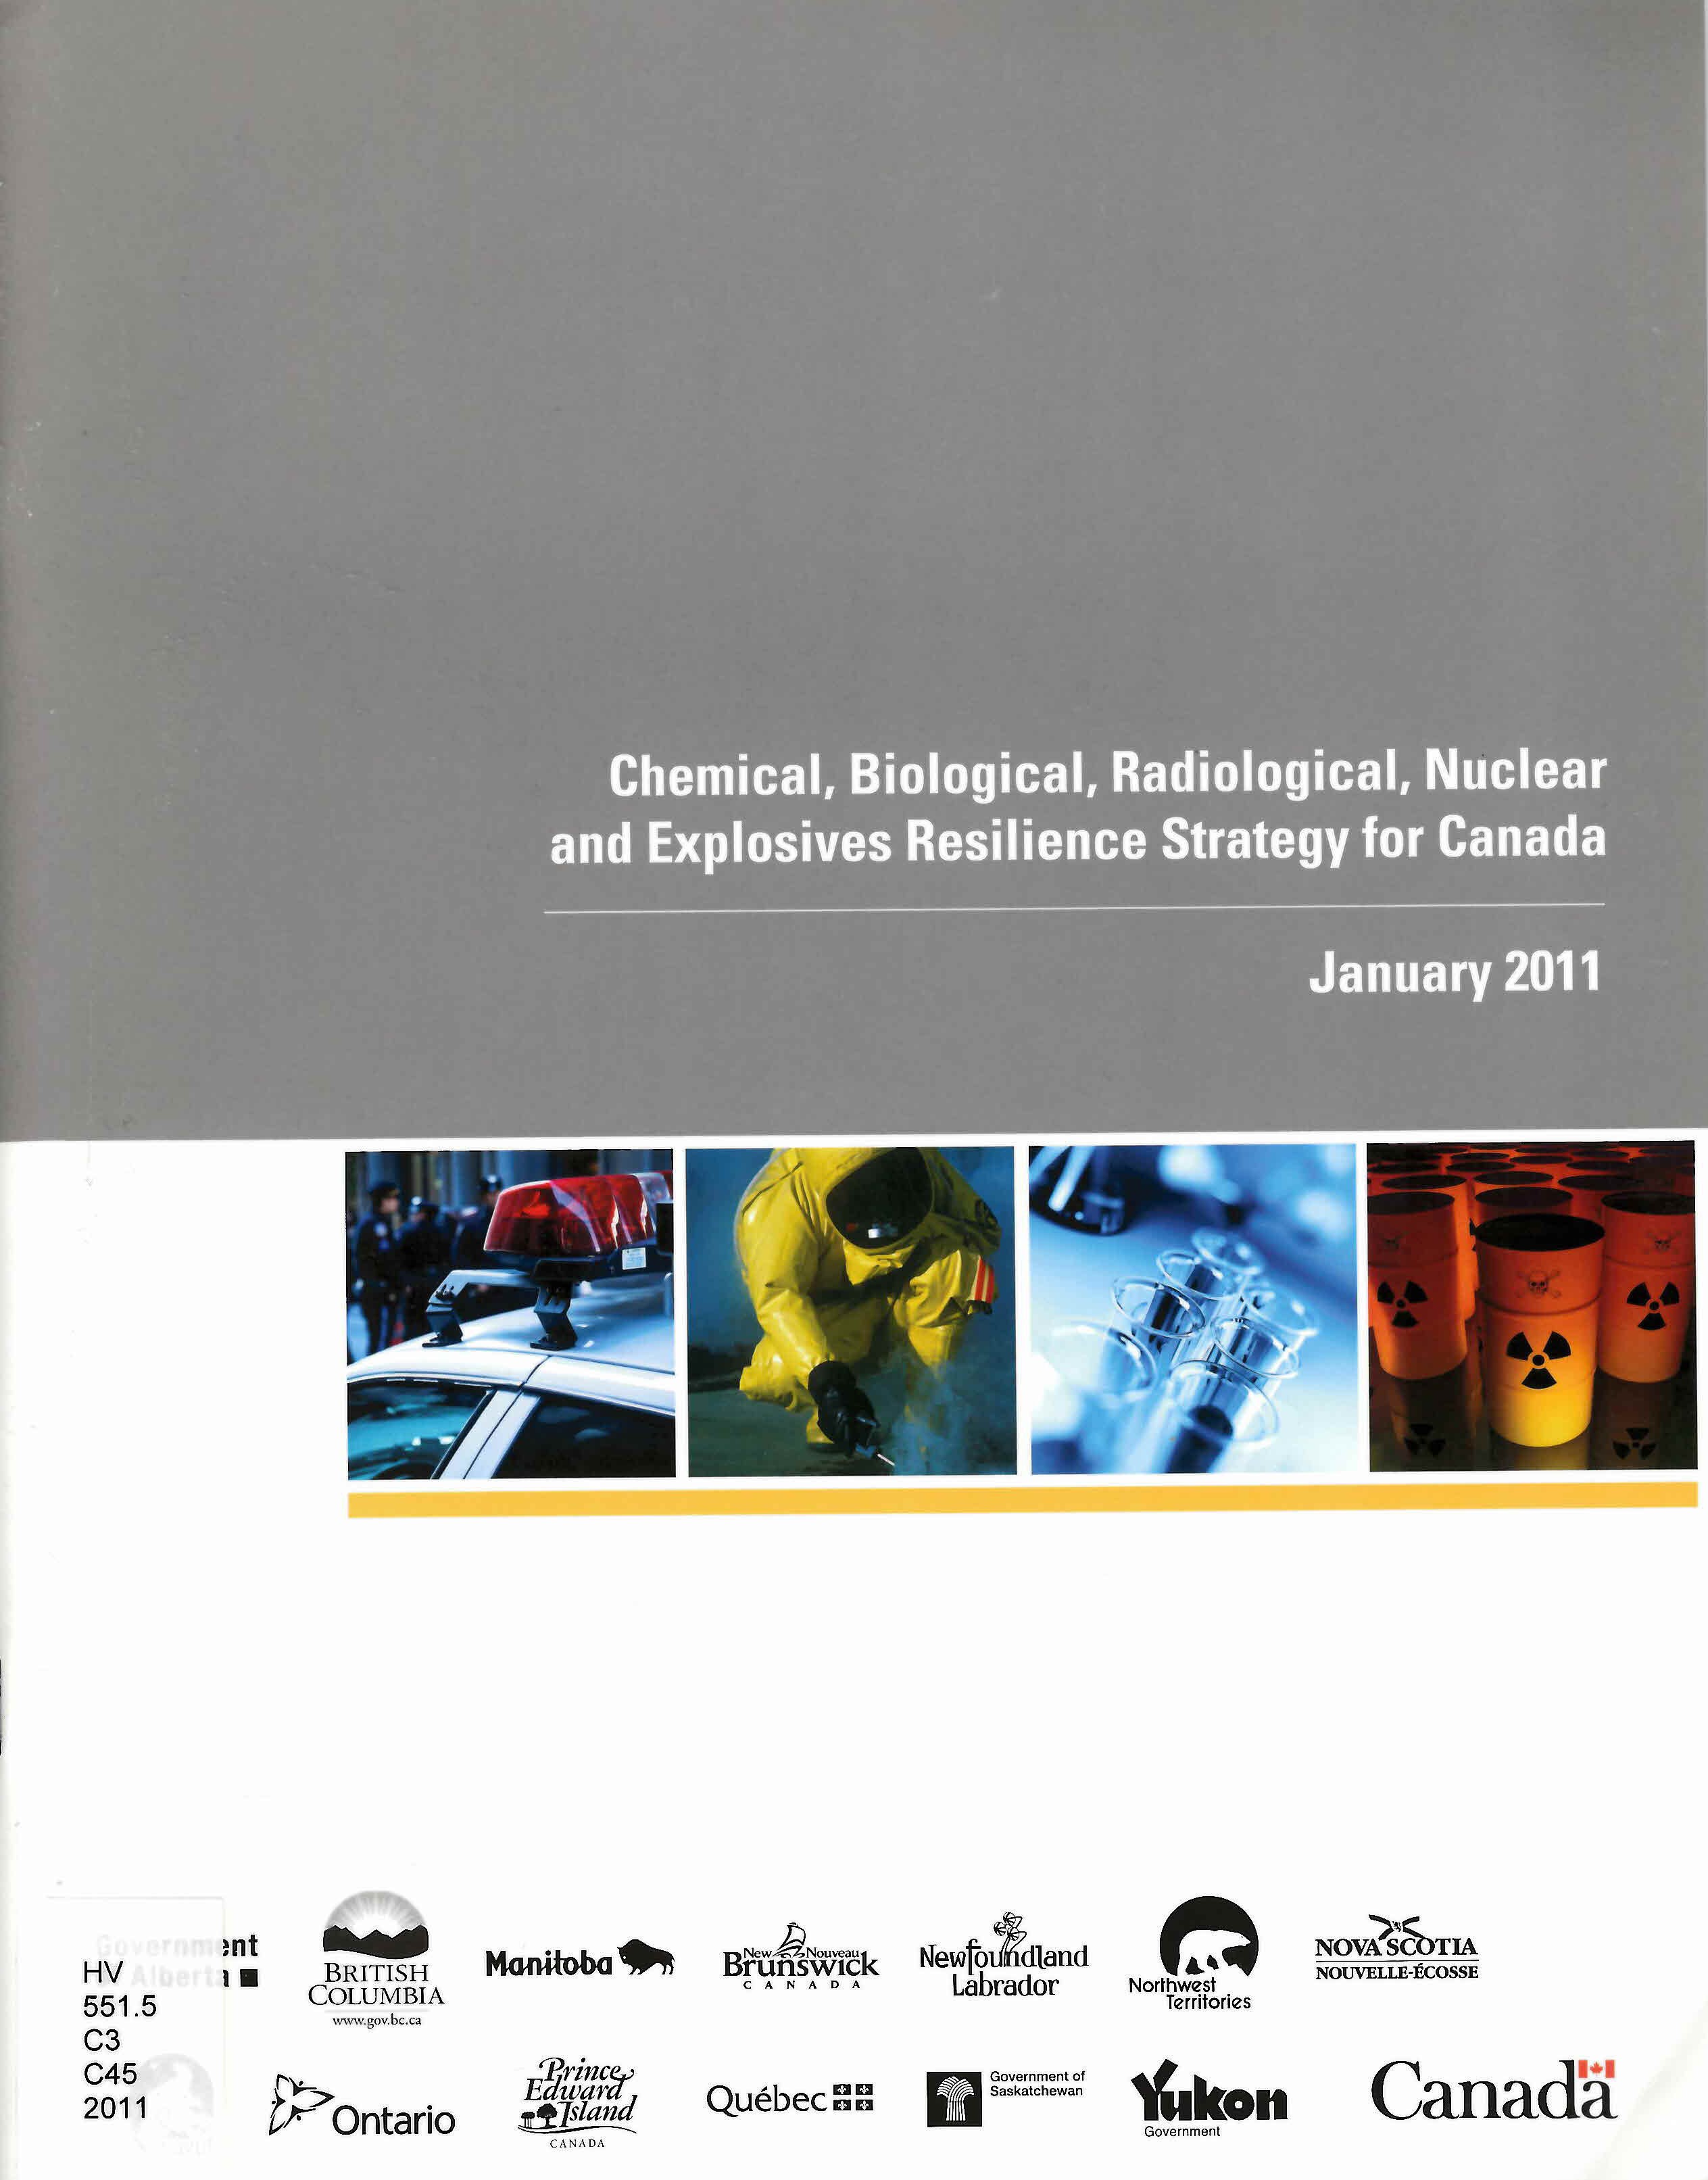 Chemical, biological, radiological, nuclear and explosives resilience strategy for Canada.